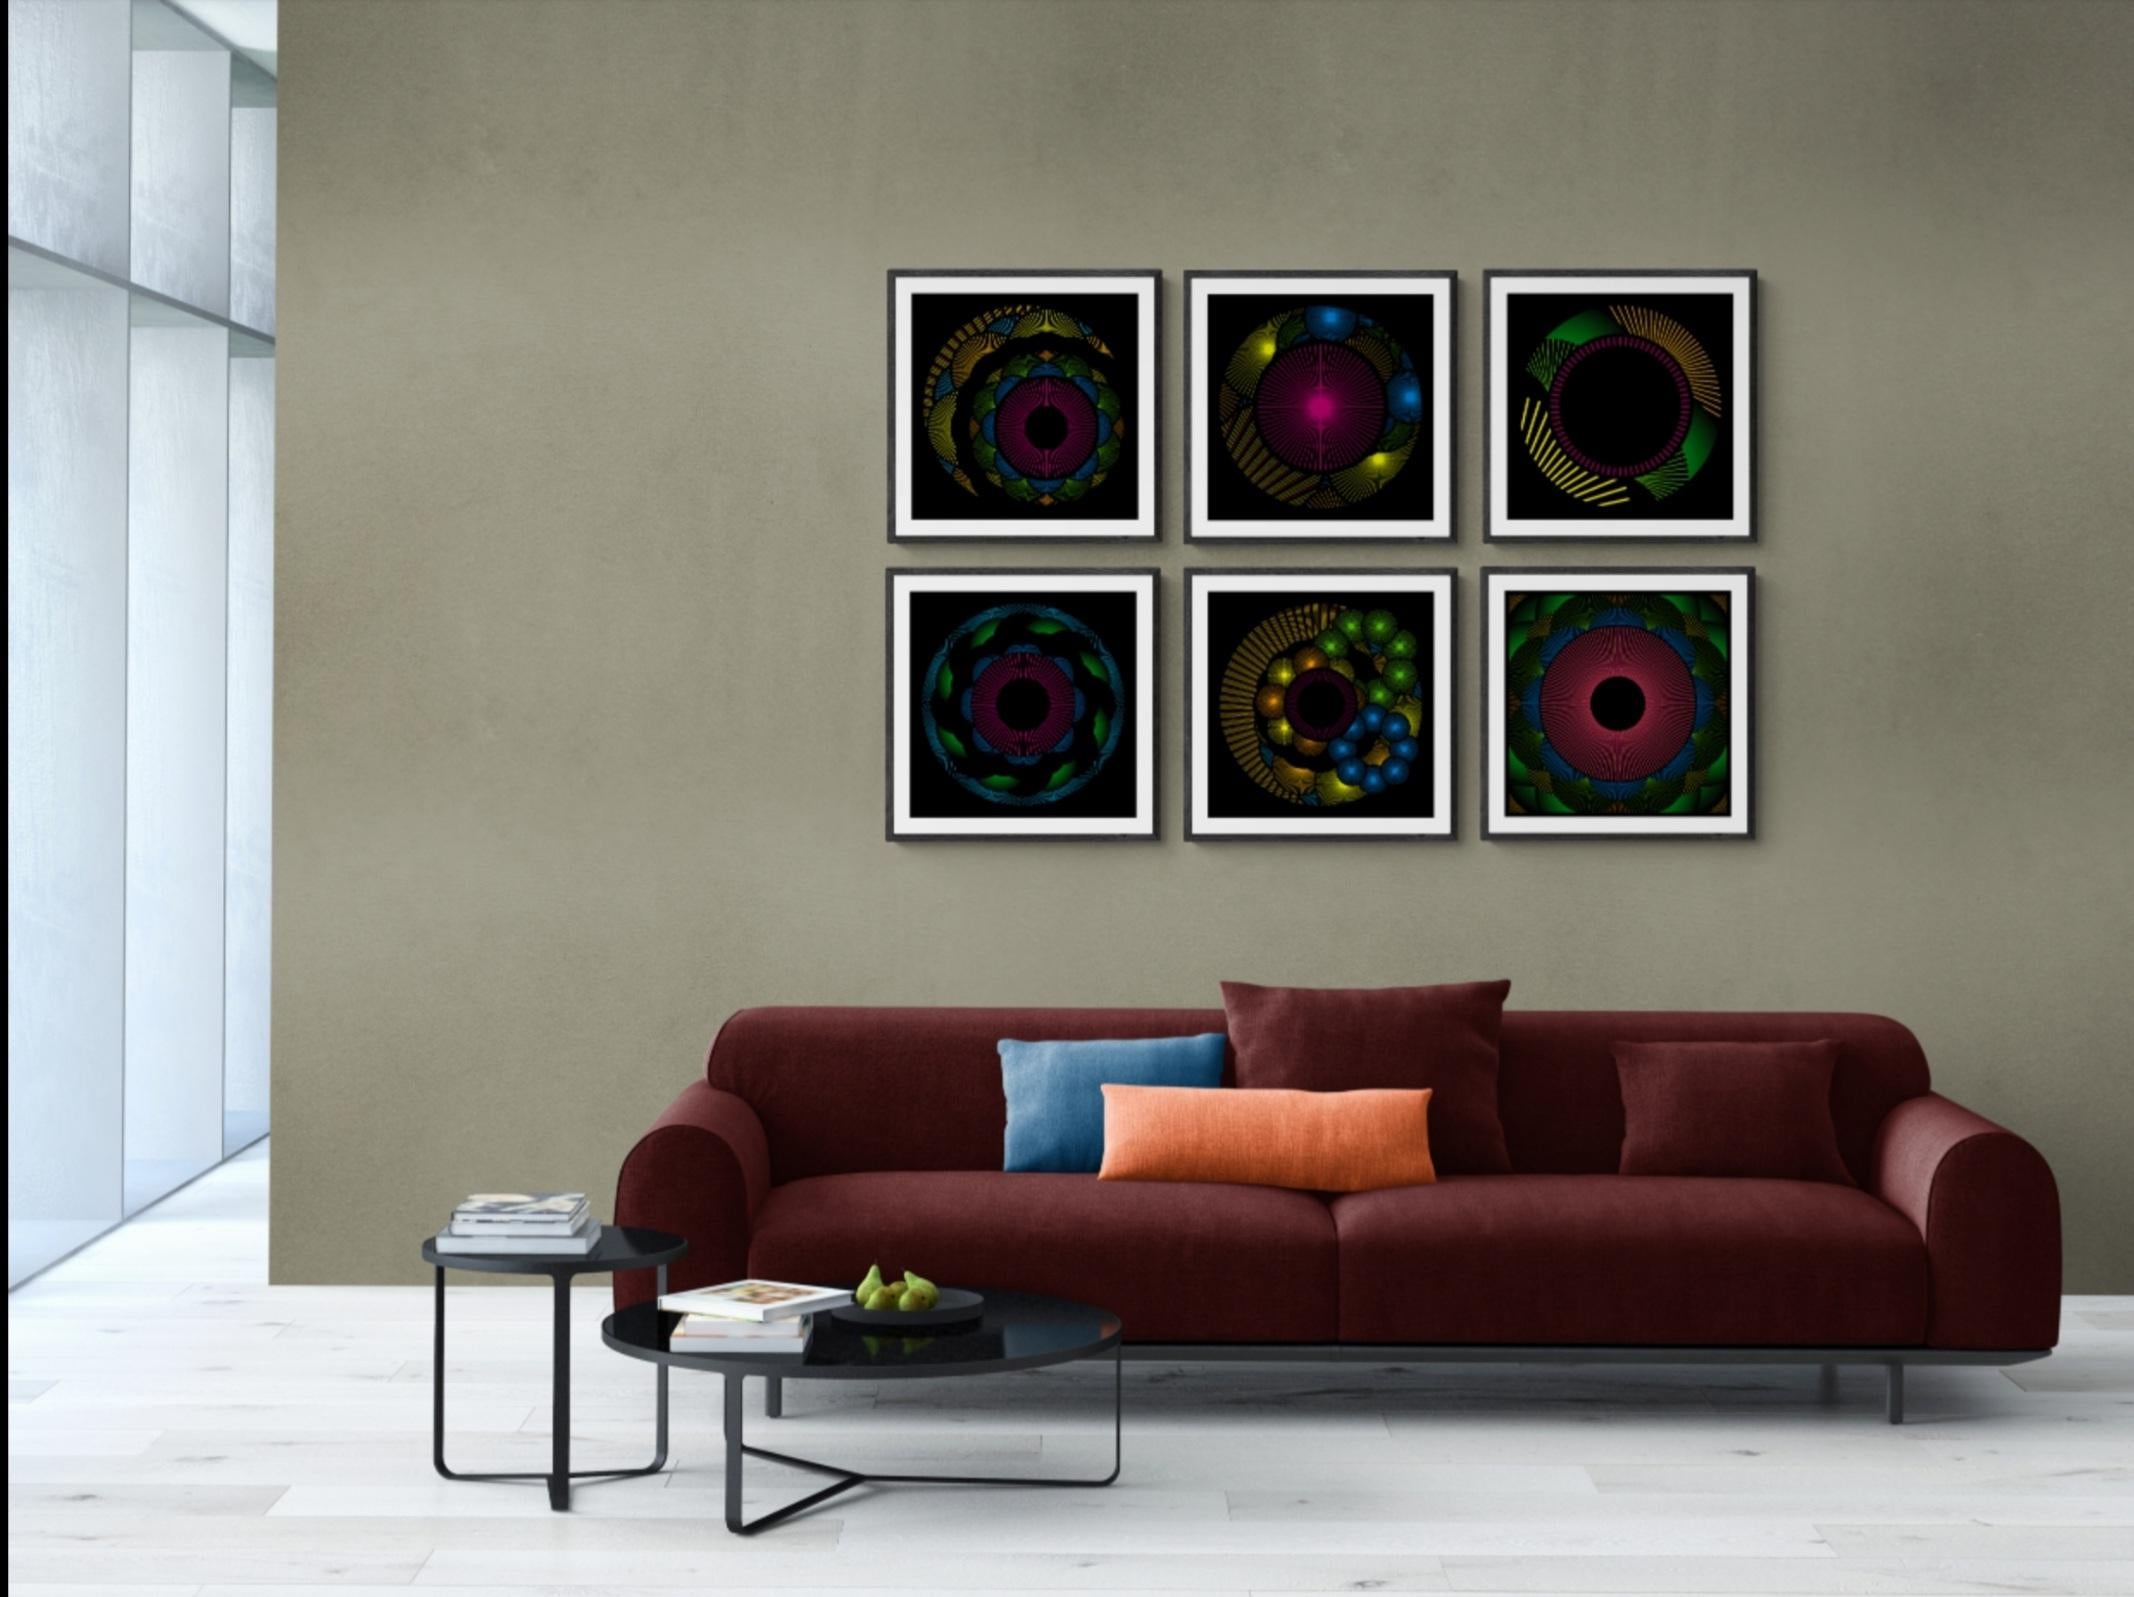 Nebulosa 19 - Abstract Geometric Print by Julio Campos